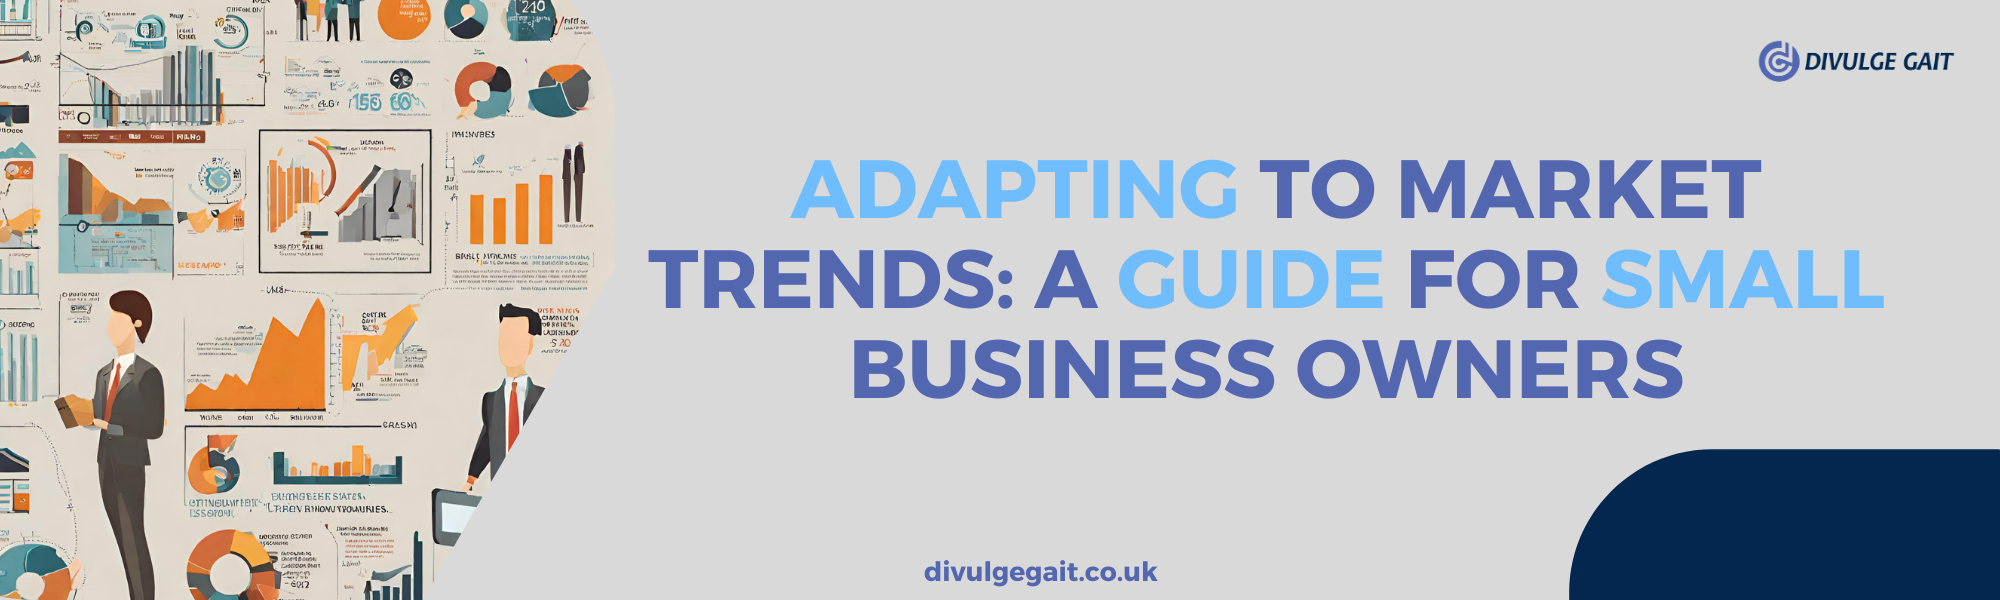 Adapting to Market Trends: A Guide for Small Business Owners.